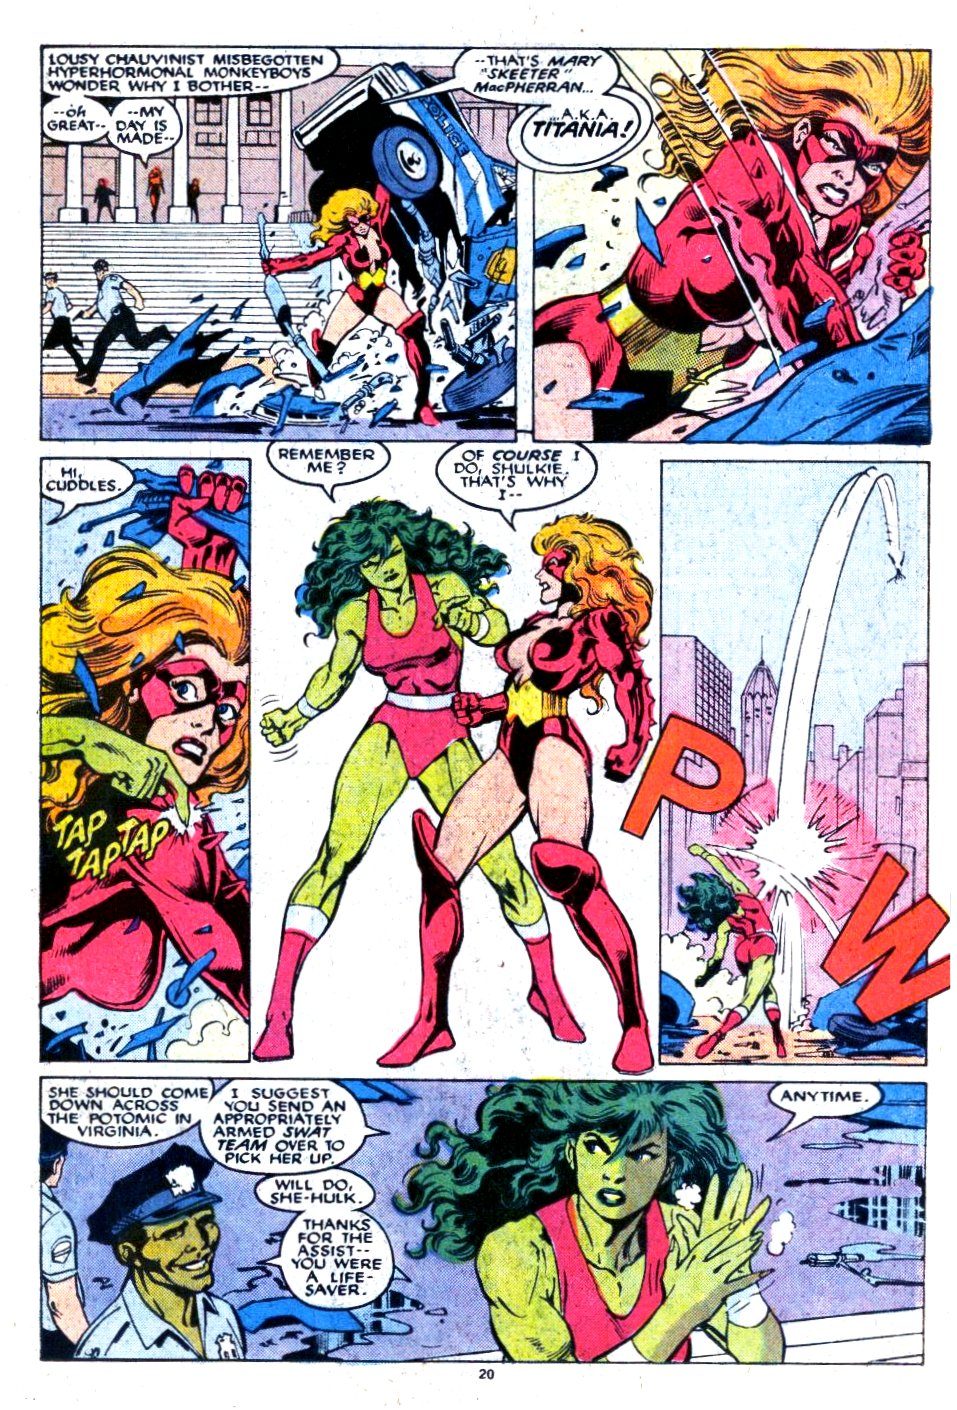 In 'Solo Avengers' (1989) #14, She-Hulk tangles with Titania, calling her "cuddles."